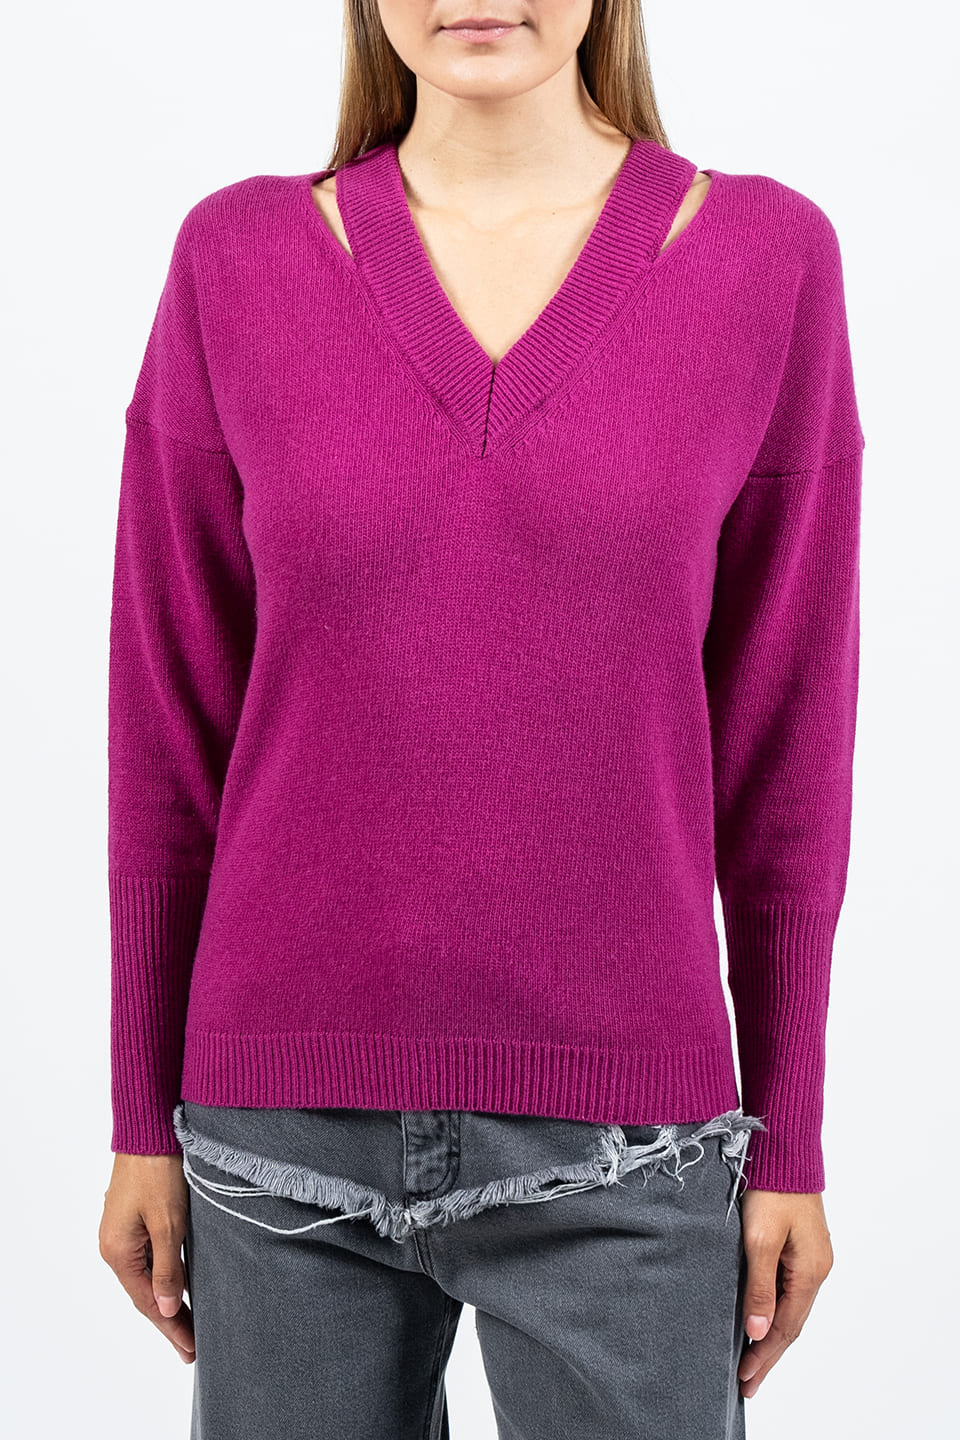 Shop online trendy Pink Women long sleeve from Federica Tosi Fashion designer. Product gallery 1